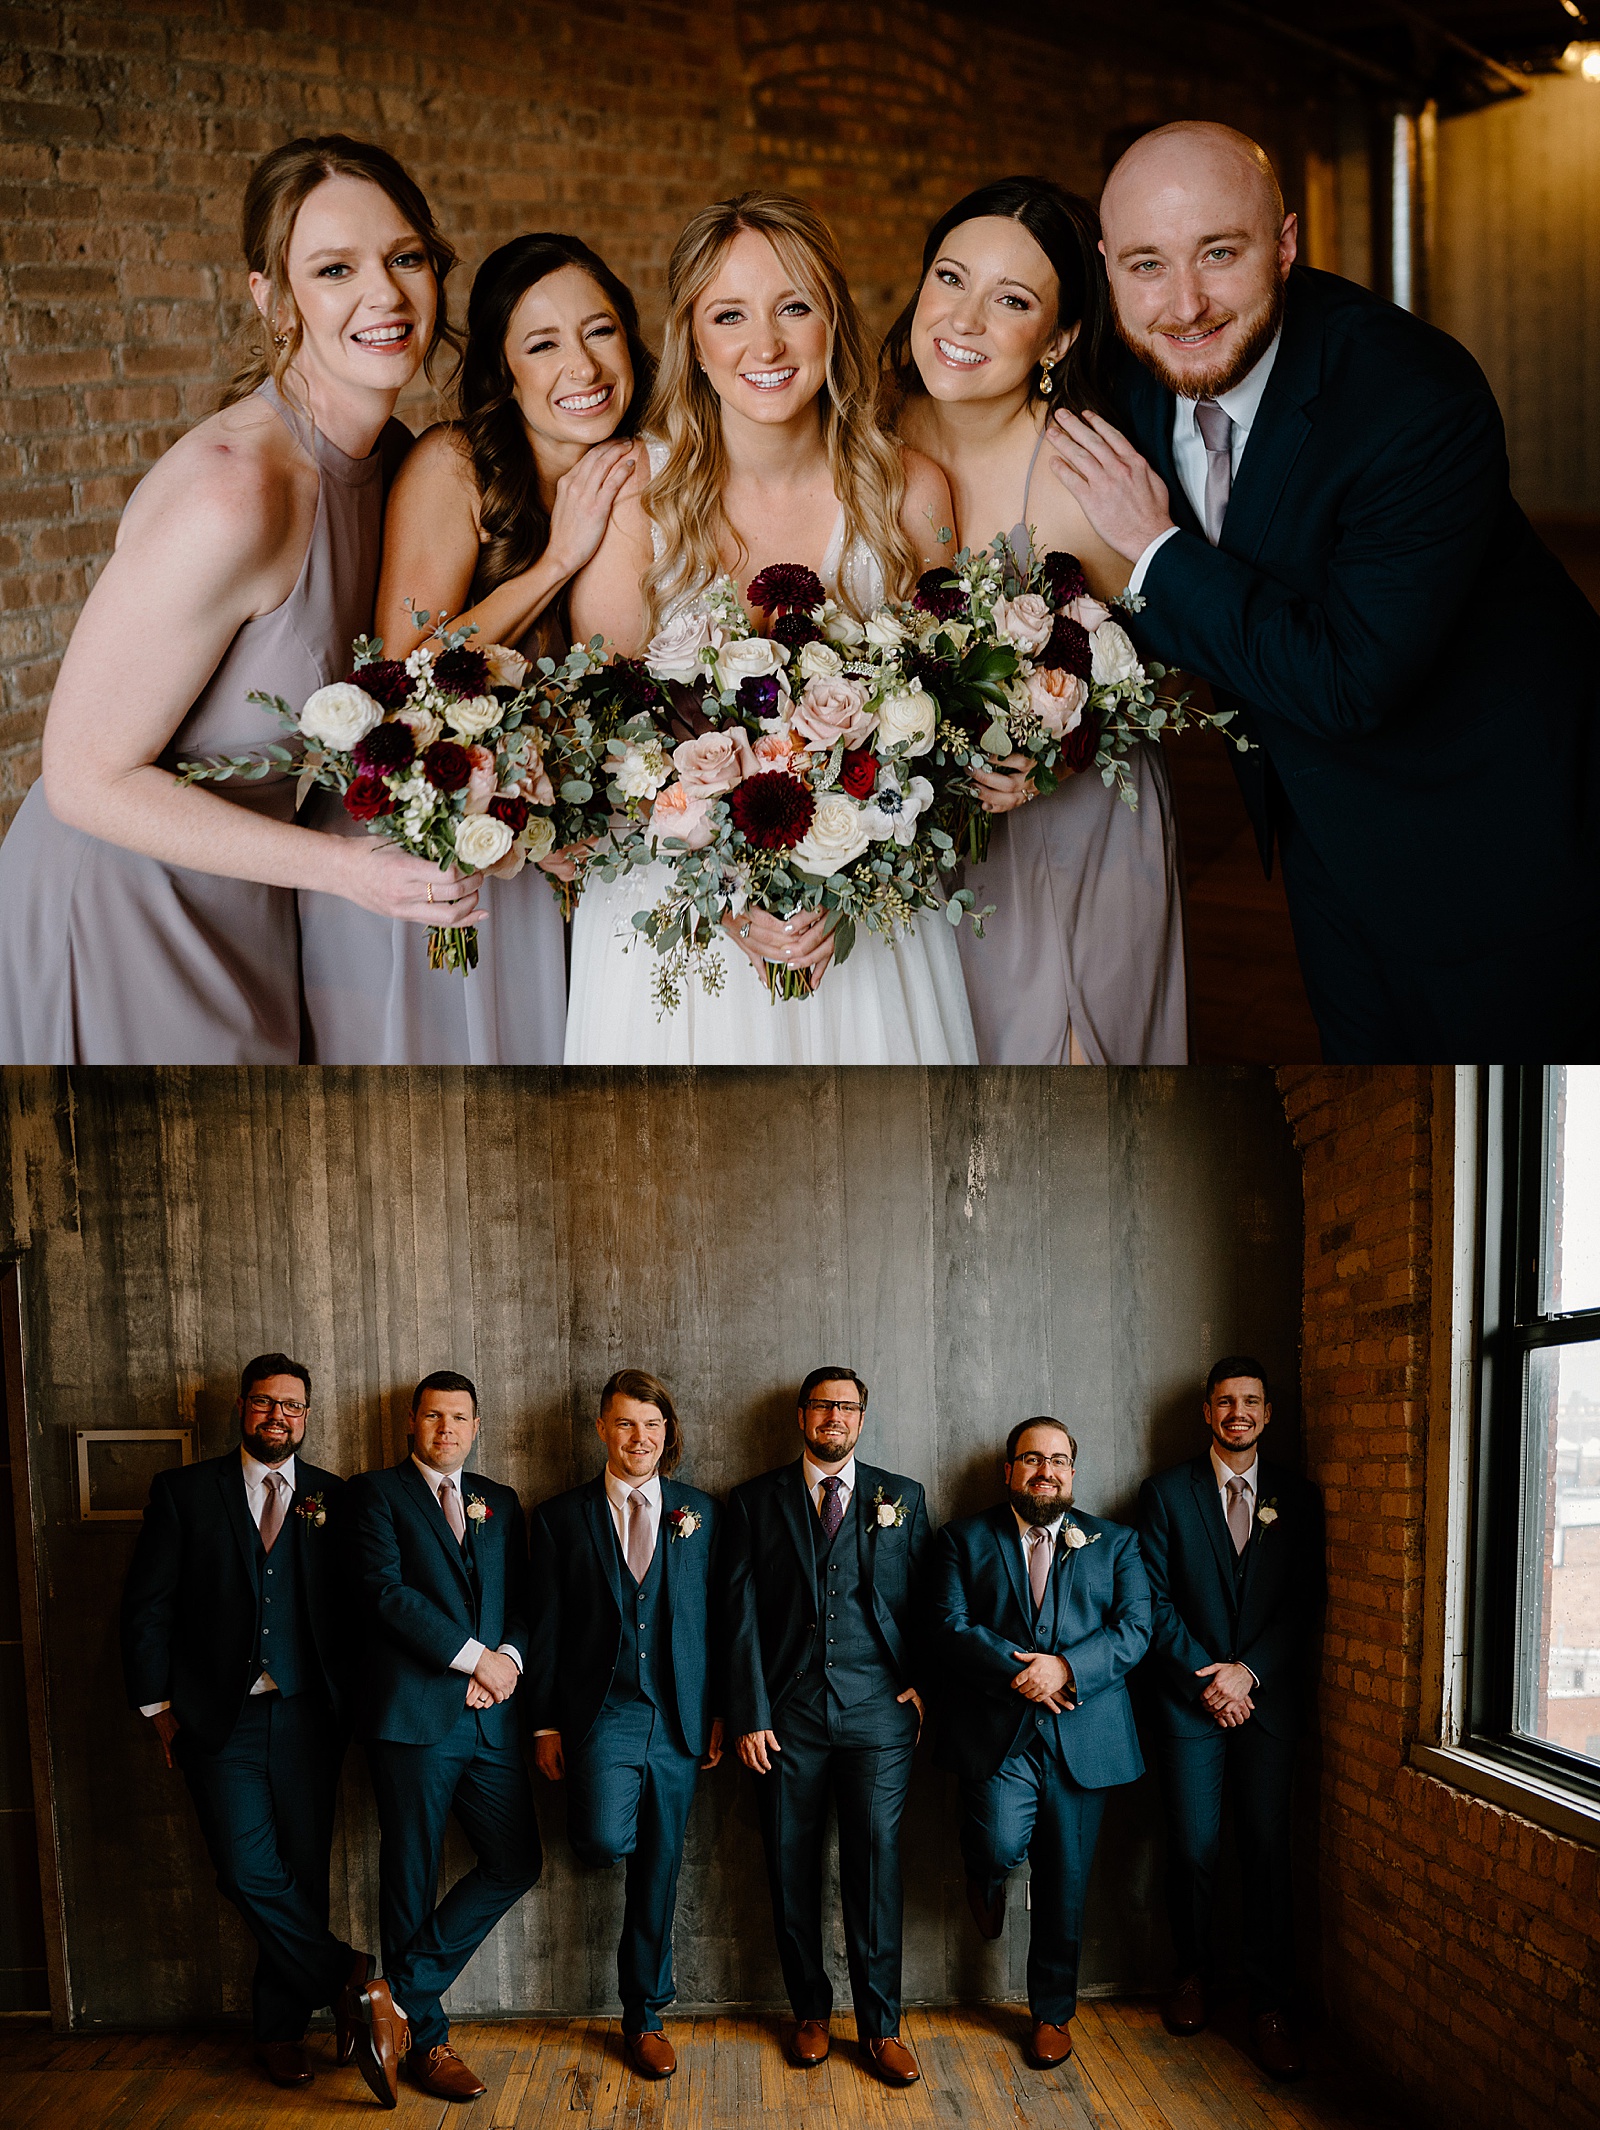 Wedding party for special day at Lacuna Lofts